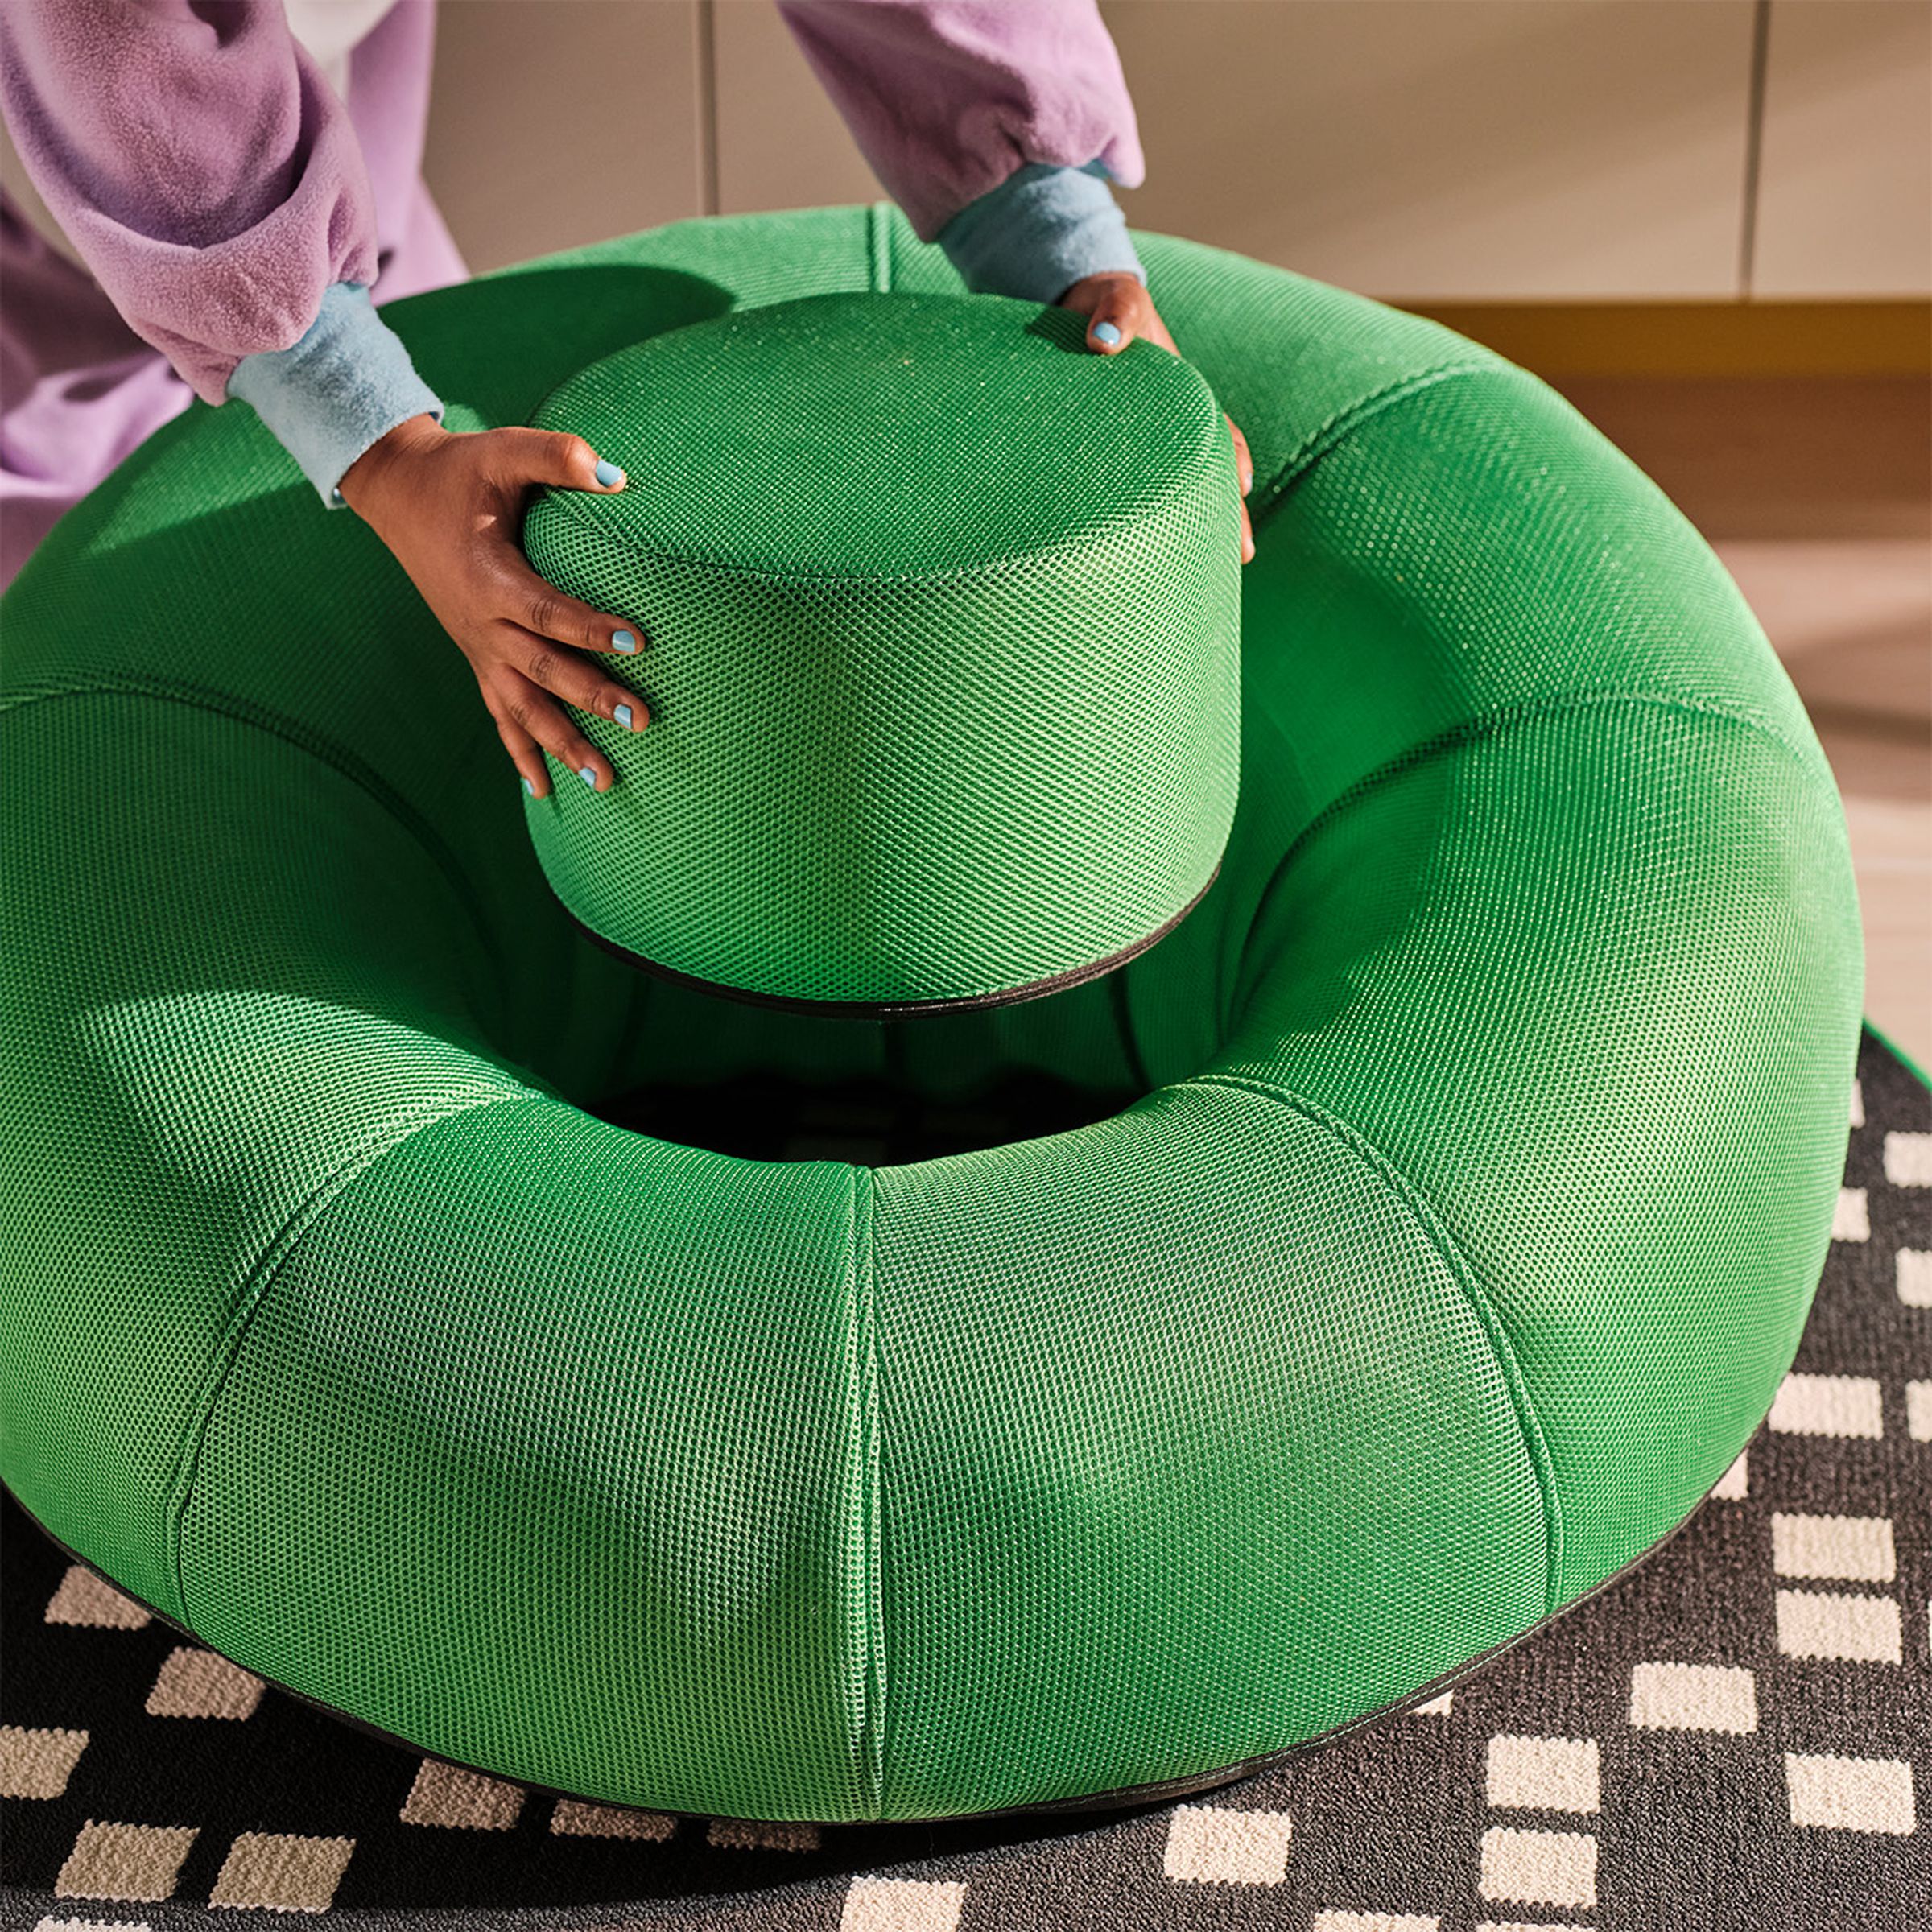 The inflatable donut chair comes with a footstool that slots neatly away into the chair itself.